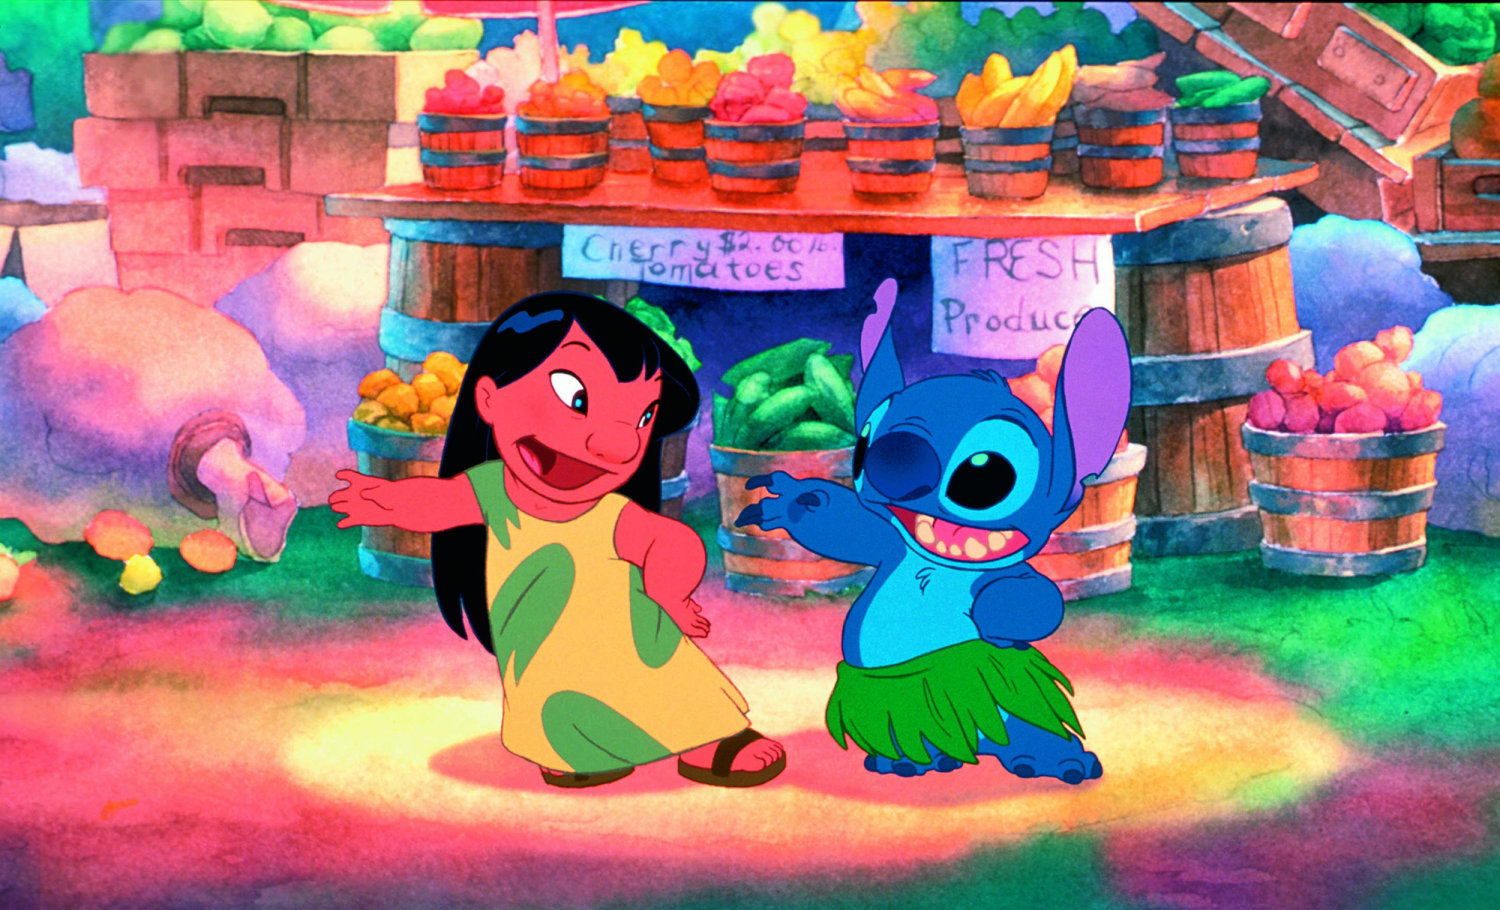 Lilo & Stitch' Live-Action Disney Remake in the Works (Exclusive